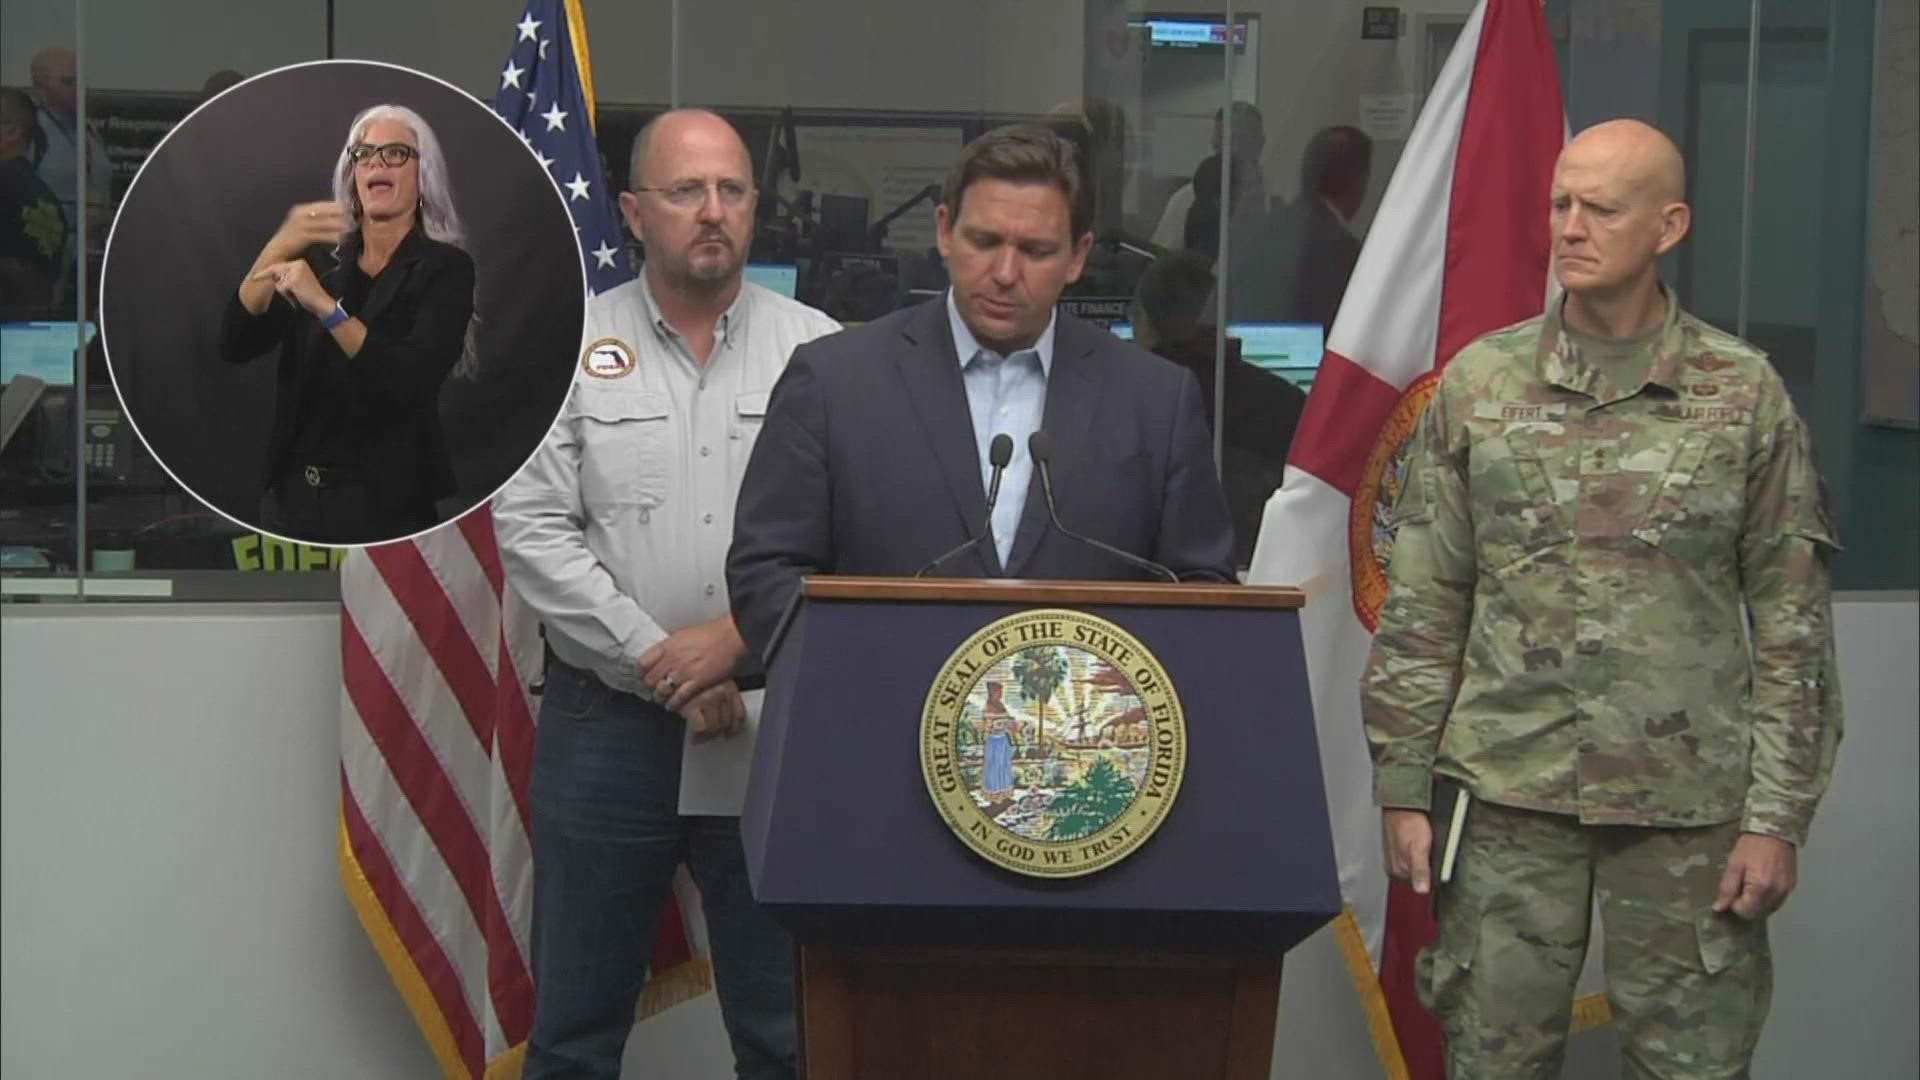 Governor DeSantis held a press conference Monday ahead of the storm.